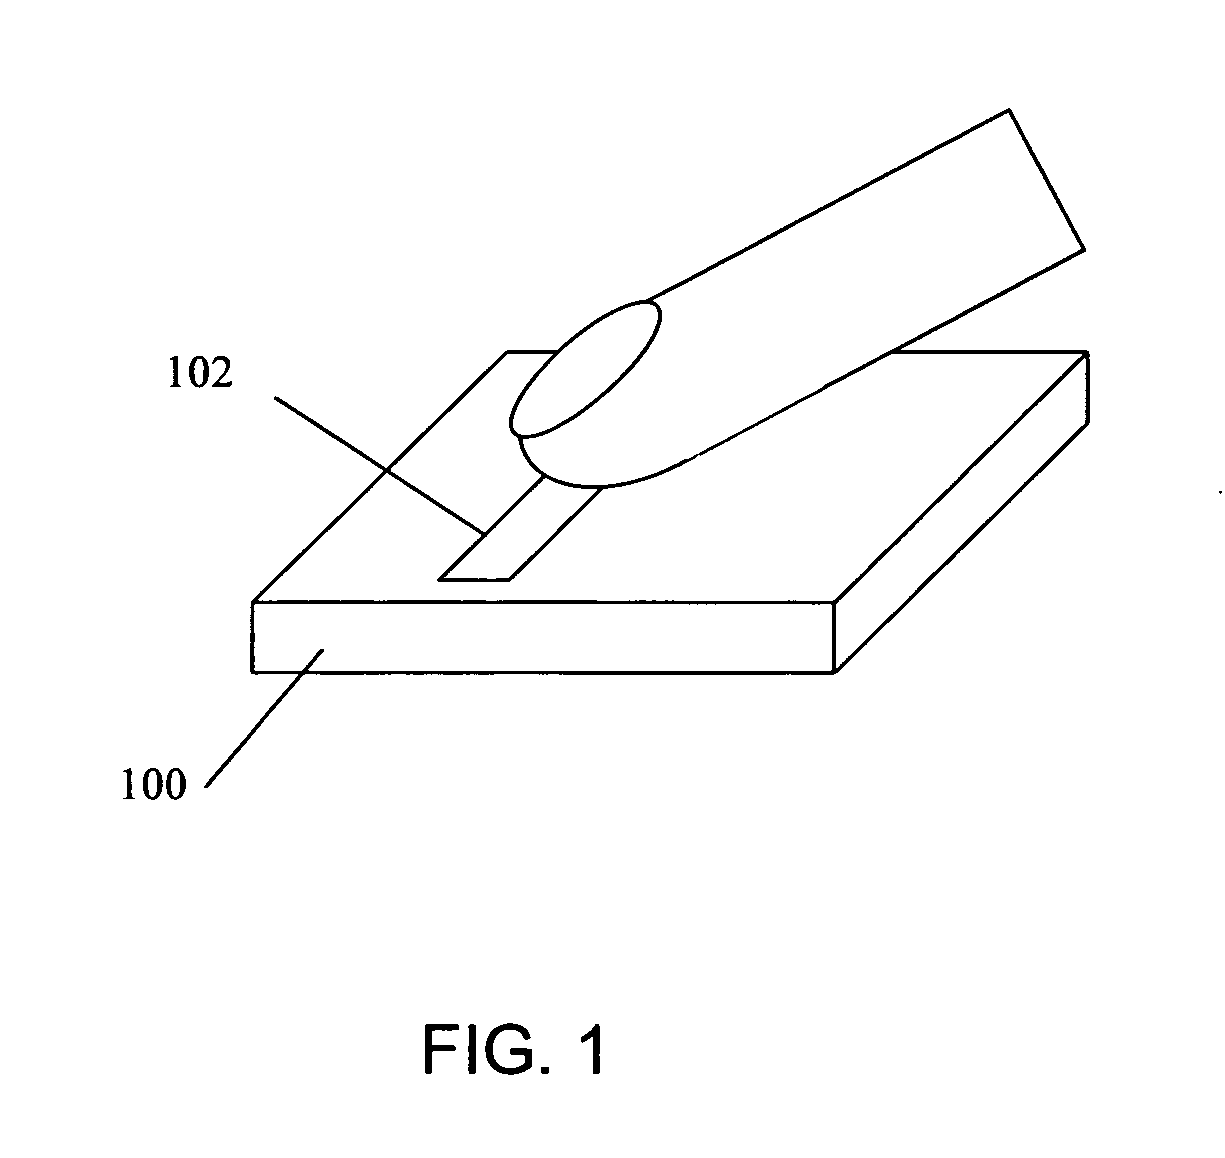 Method and system for swipe sensor image alignment using fourier phase analysis